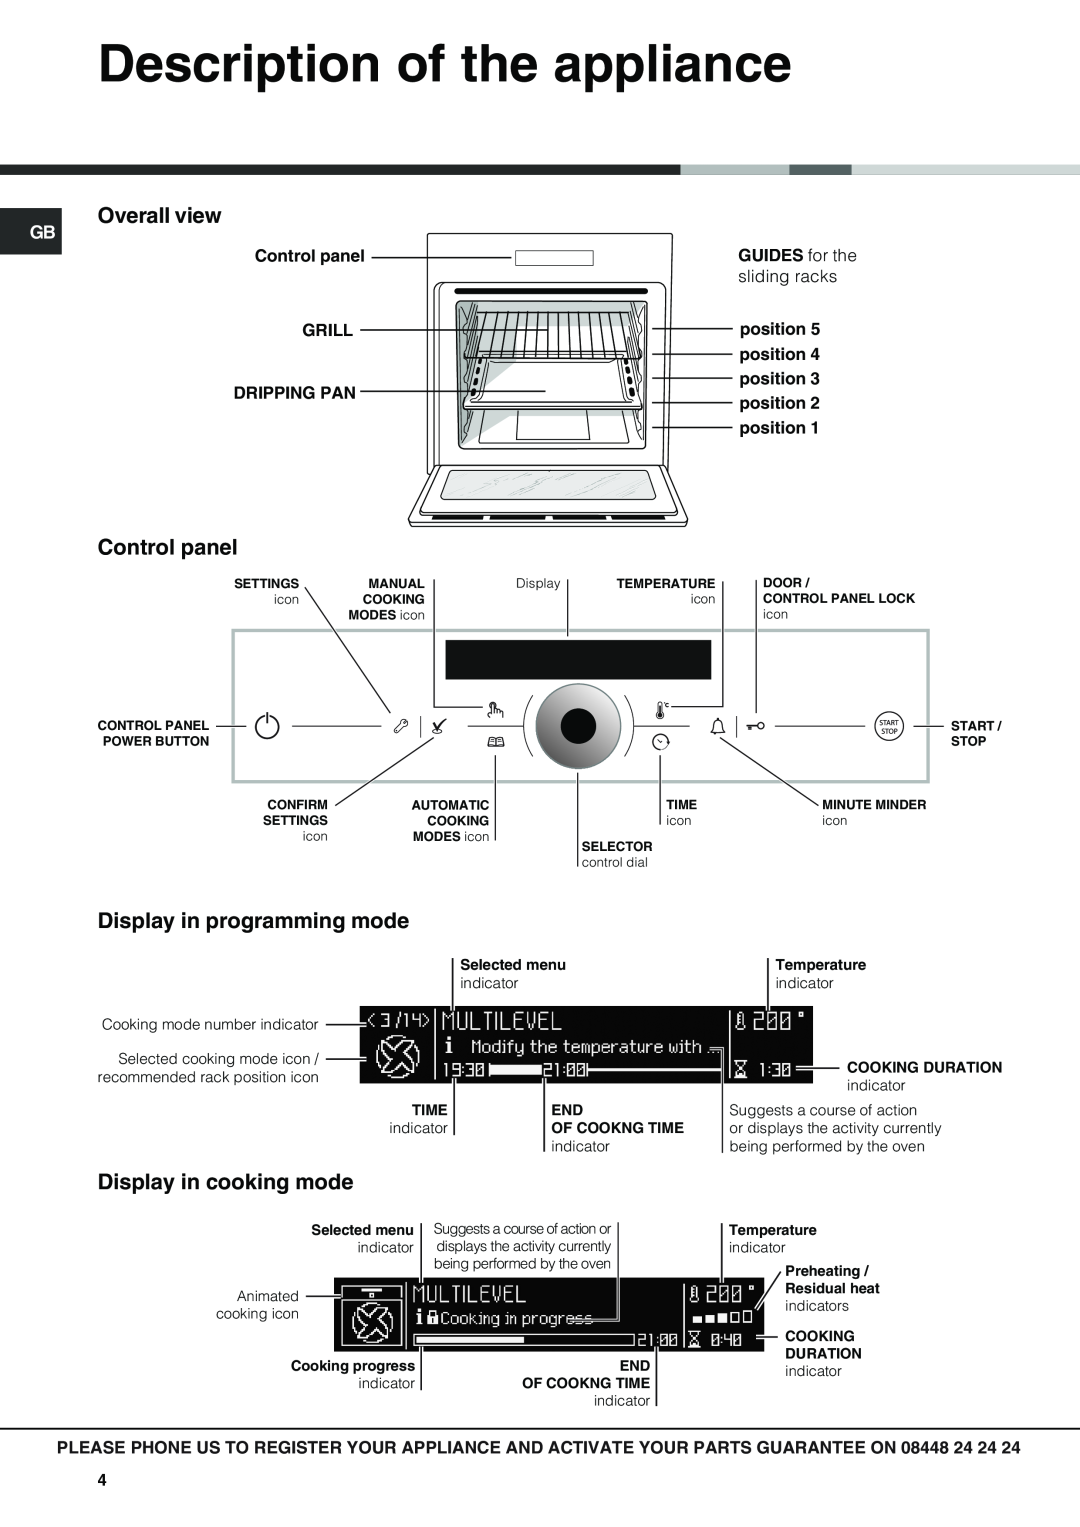 Hotpoint SX1046L PX, SX 1046Q PX Description of the appliance, Overall view, Control panel, Display in programming mode 